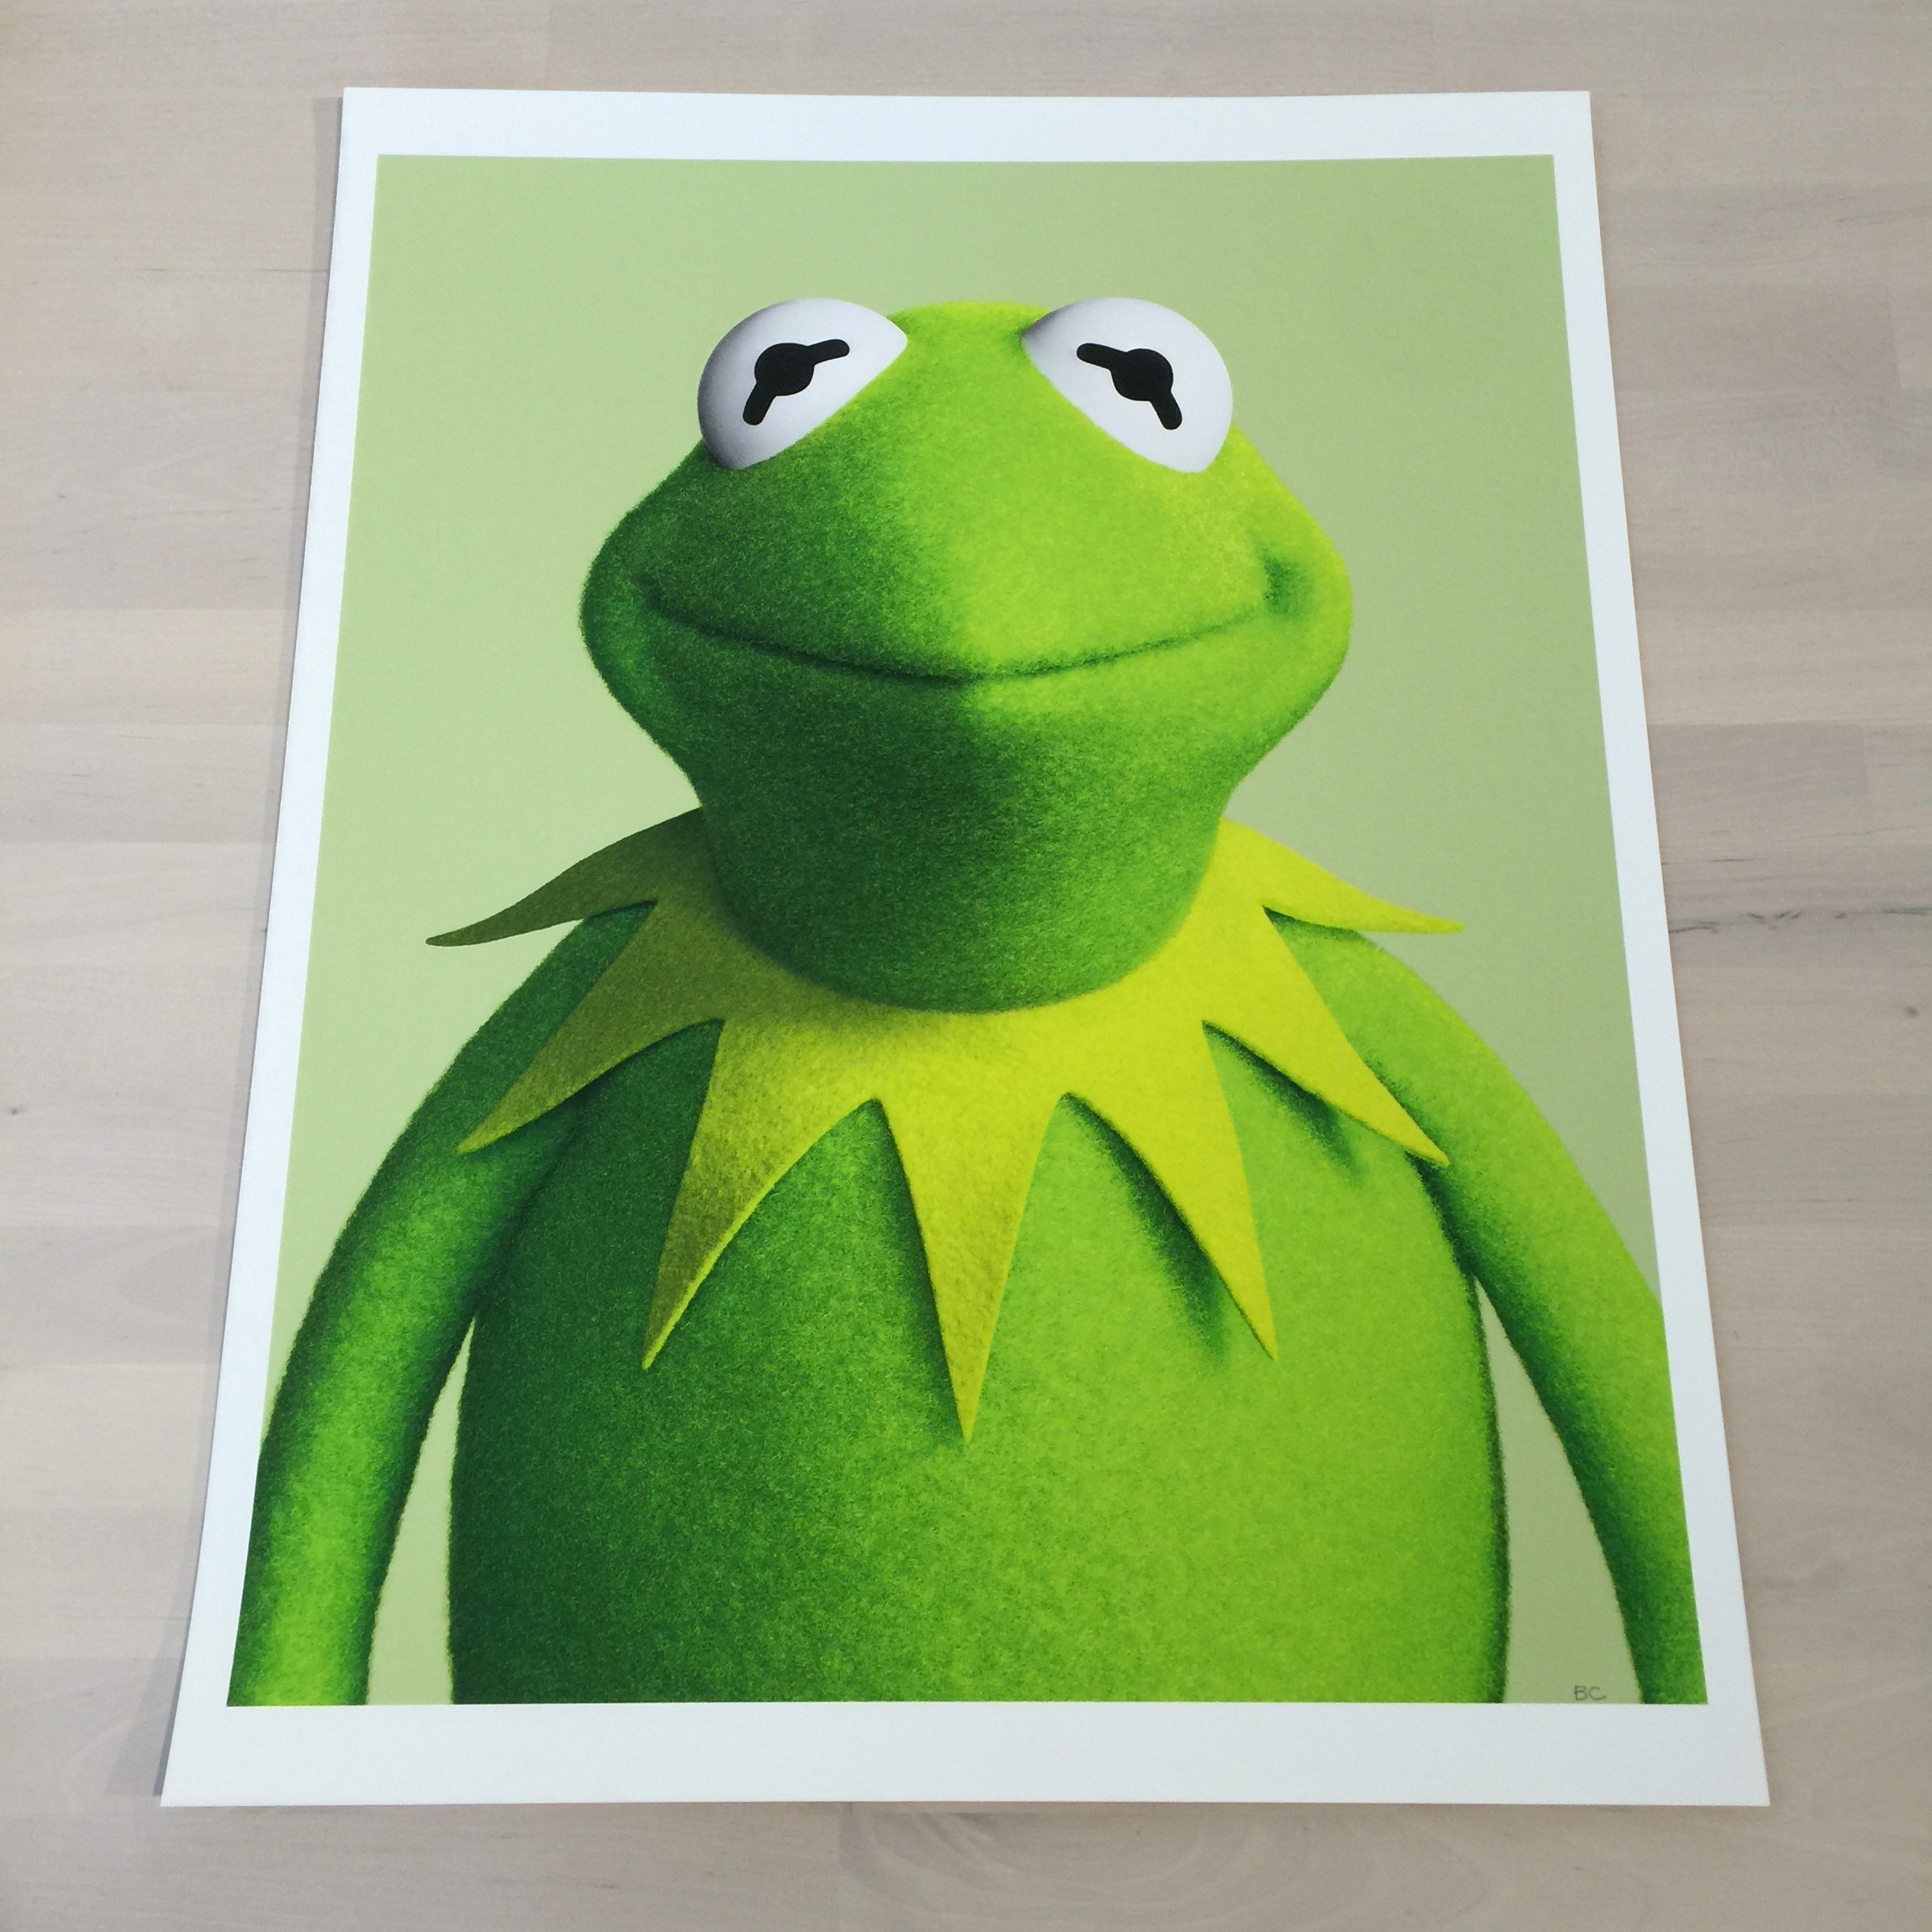 List 91+ Wallpaper Images For Kermit The Frog Stunning